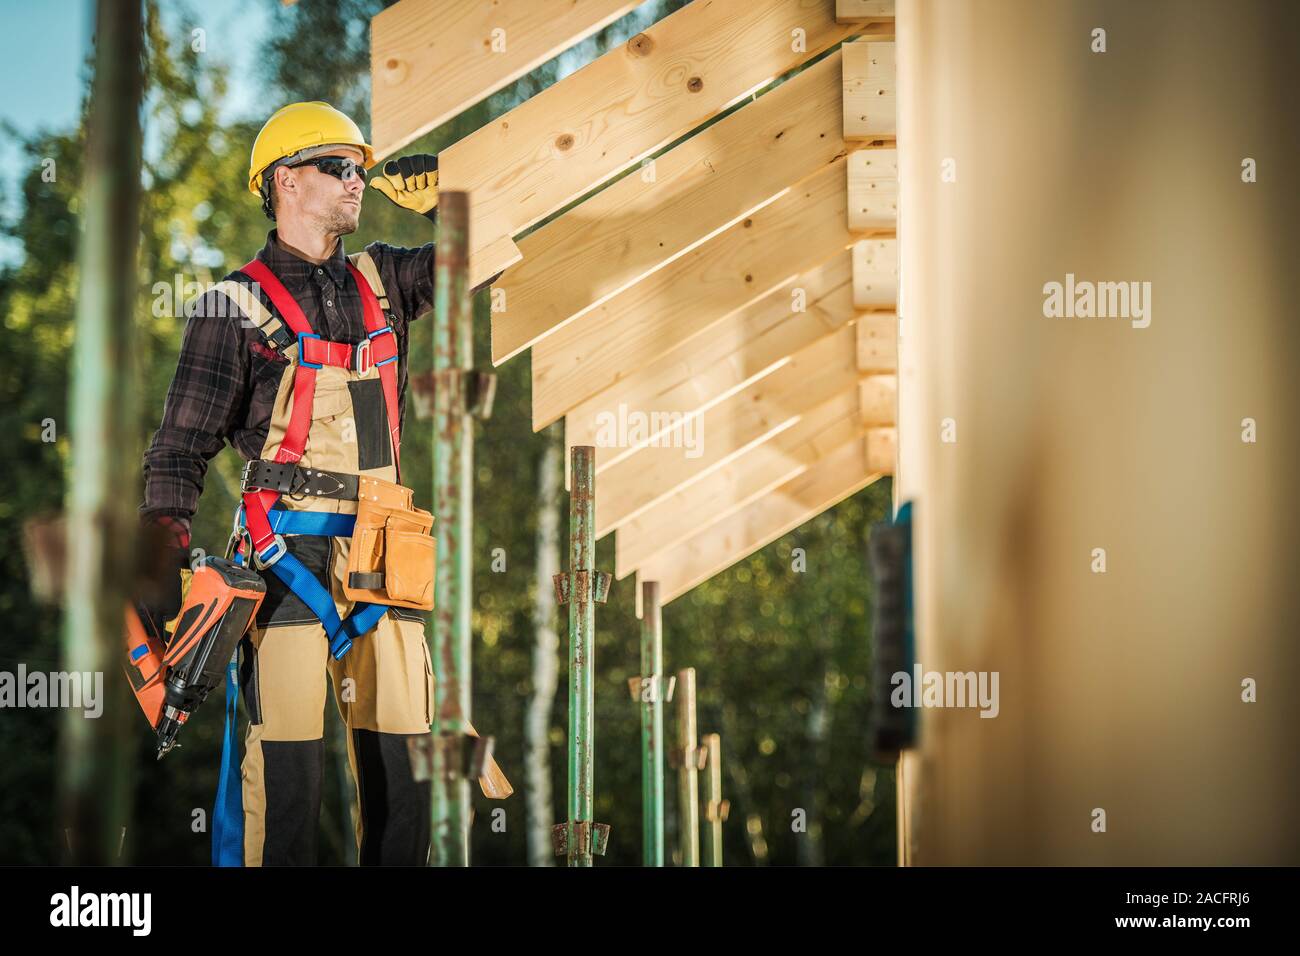 Construction Worker with Nail Gun in a Hand. Contractor and His Wood Framing Job. House Building. Stock Photo